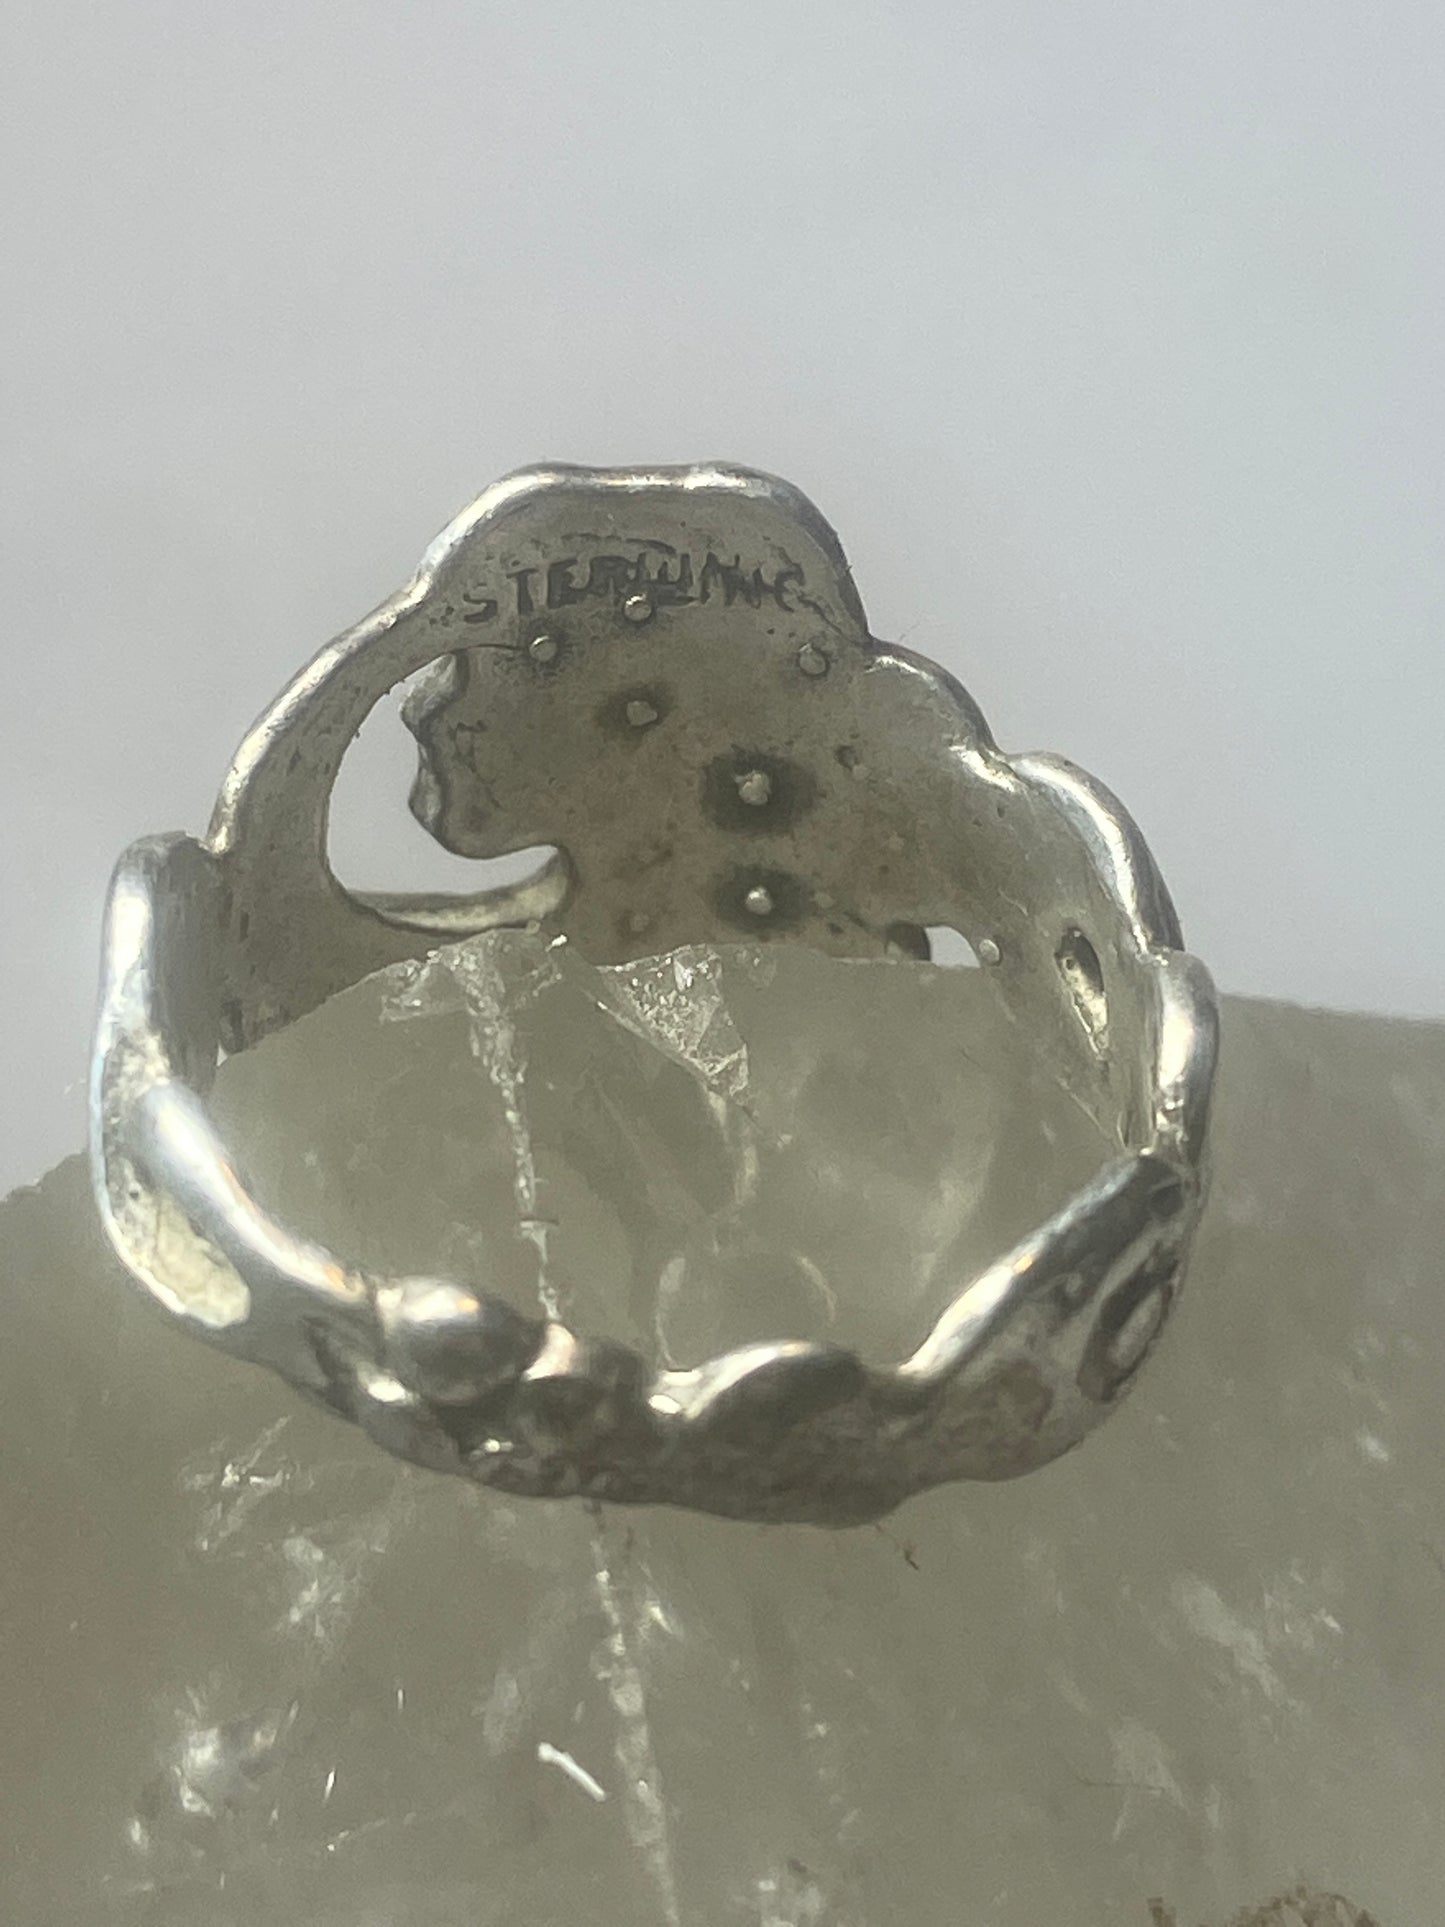 Lady face ring Art Deco influences floral band sterling silver women girls